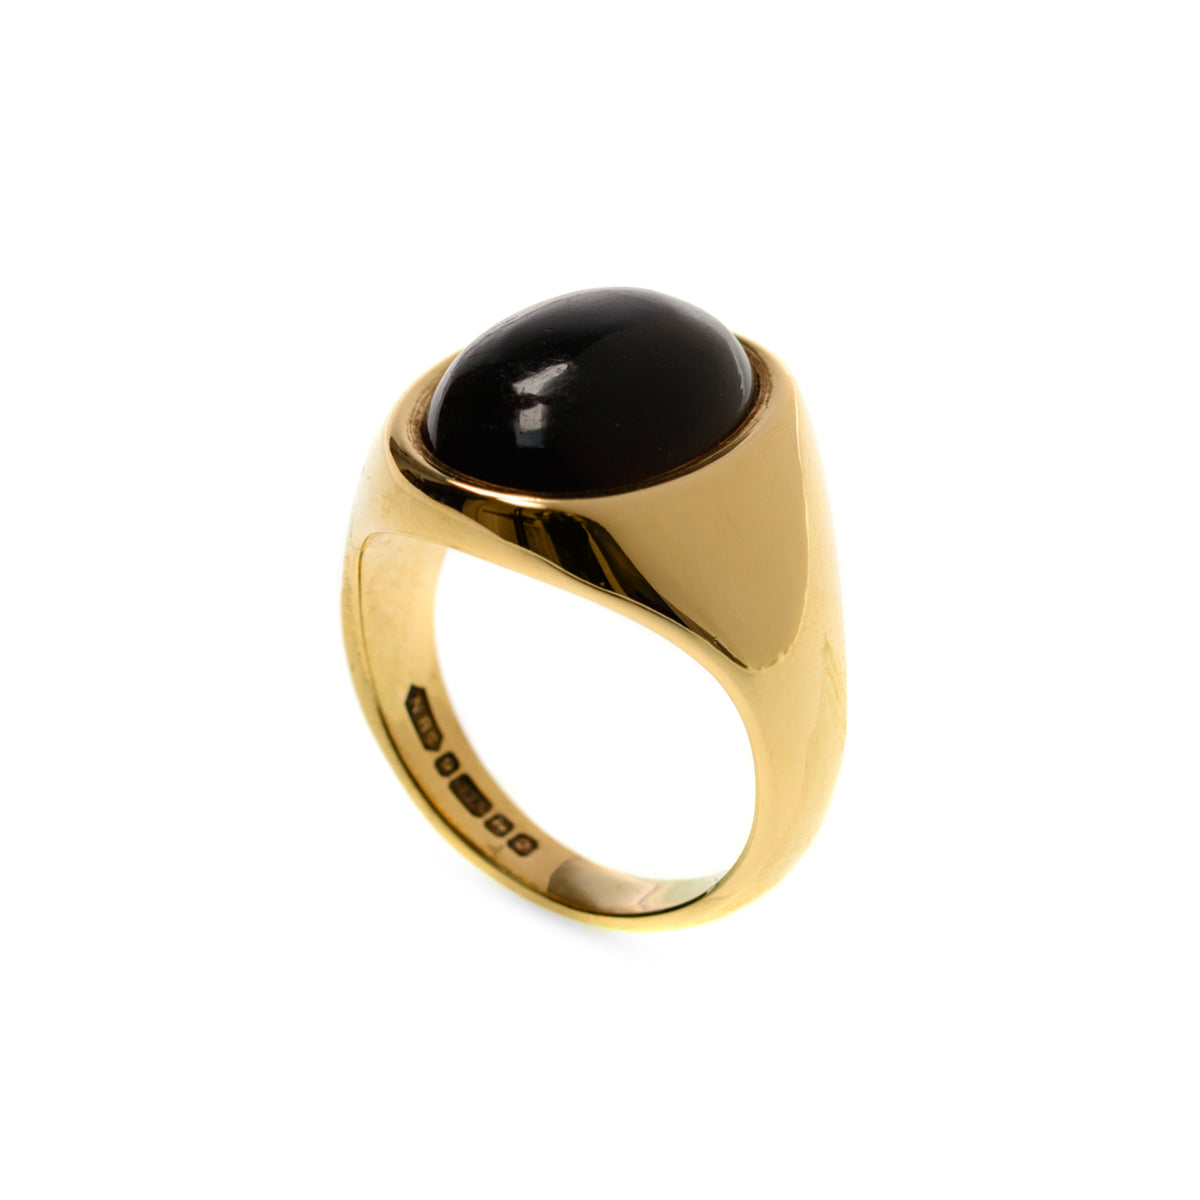 Vintage Men's 9ct Gold & Dark Blood Carnelian Chunky Signet Ring Size Q (Code A875)